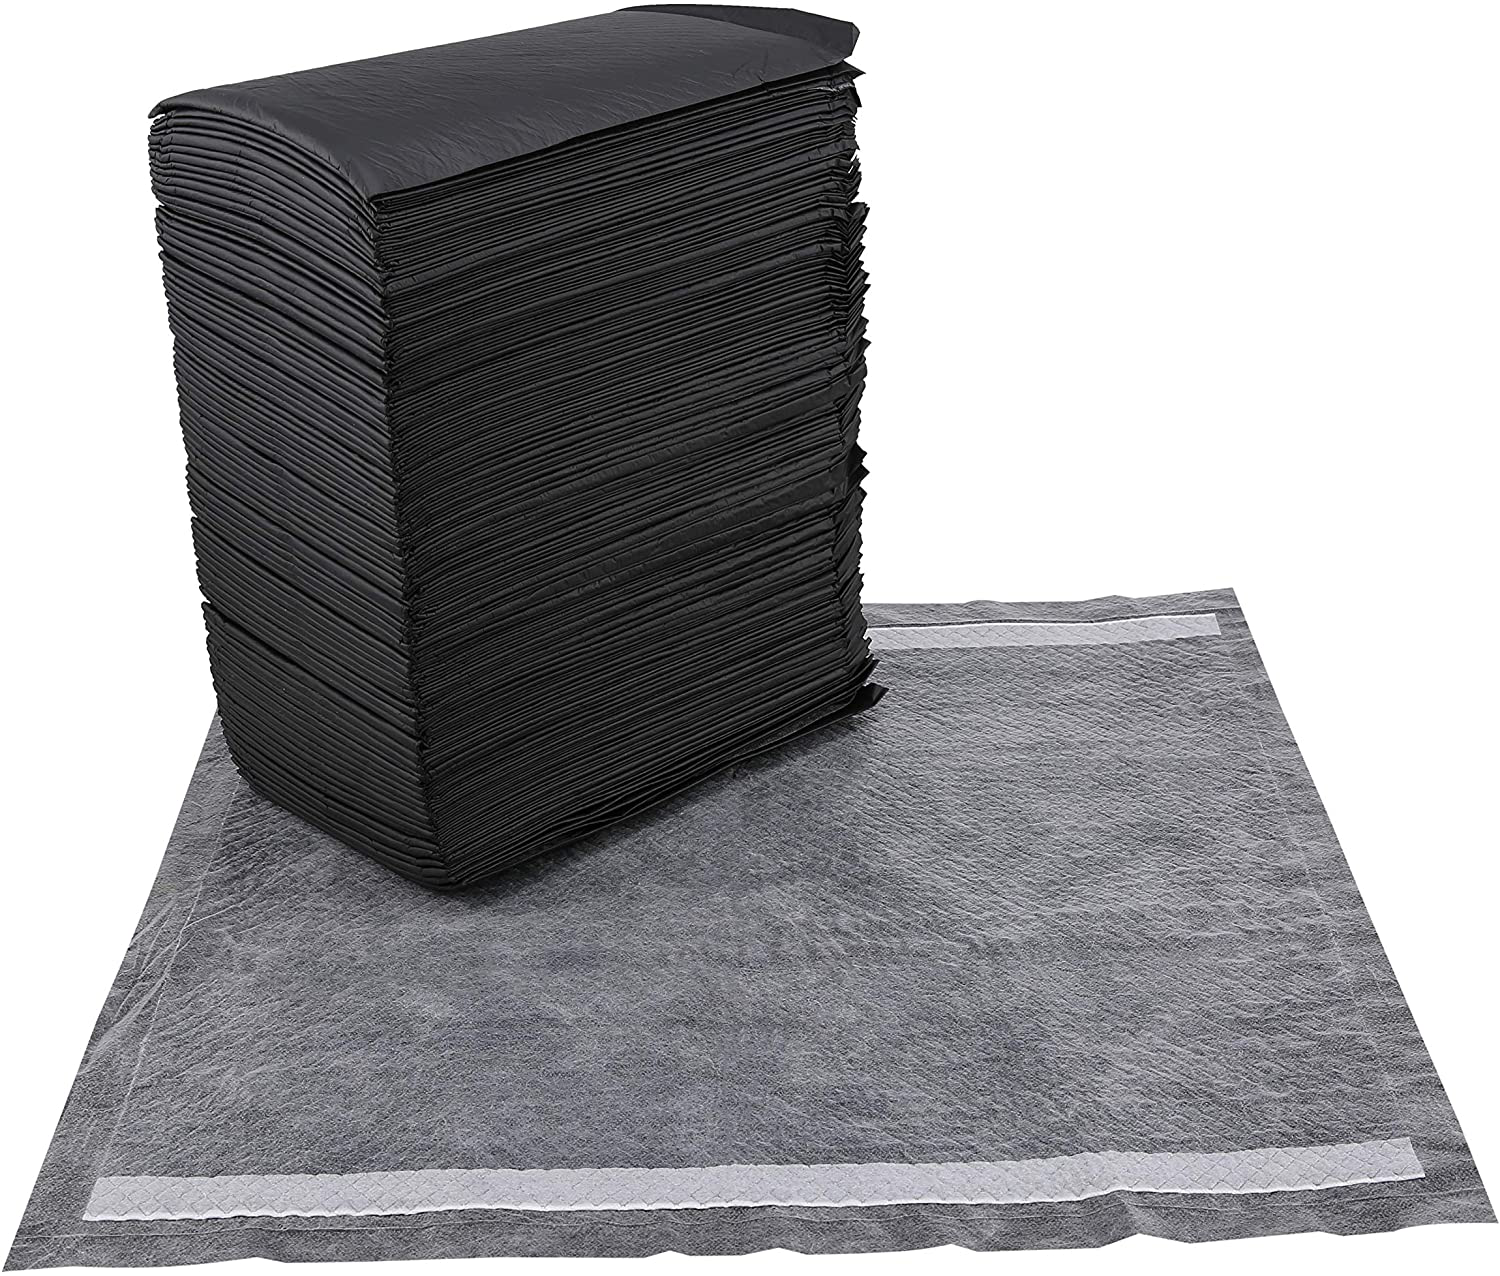 Glad for Pets Black Charcoal Puppy Pads-New & Improved Puppy Potty Training Pads That ABSORB & NEUTRALIZE Urine Instantly-Training Pads for Dogs, Dog Pee Pads, Pee Pads for Dogs, Dog Crate Pads Animals & Pet Supplies > Pet Supplies > Dog Supplies > Dog Kennels & Runs Glad   